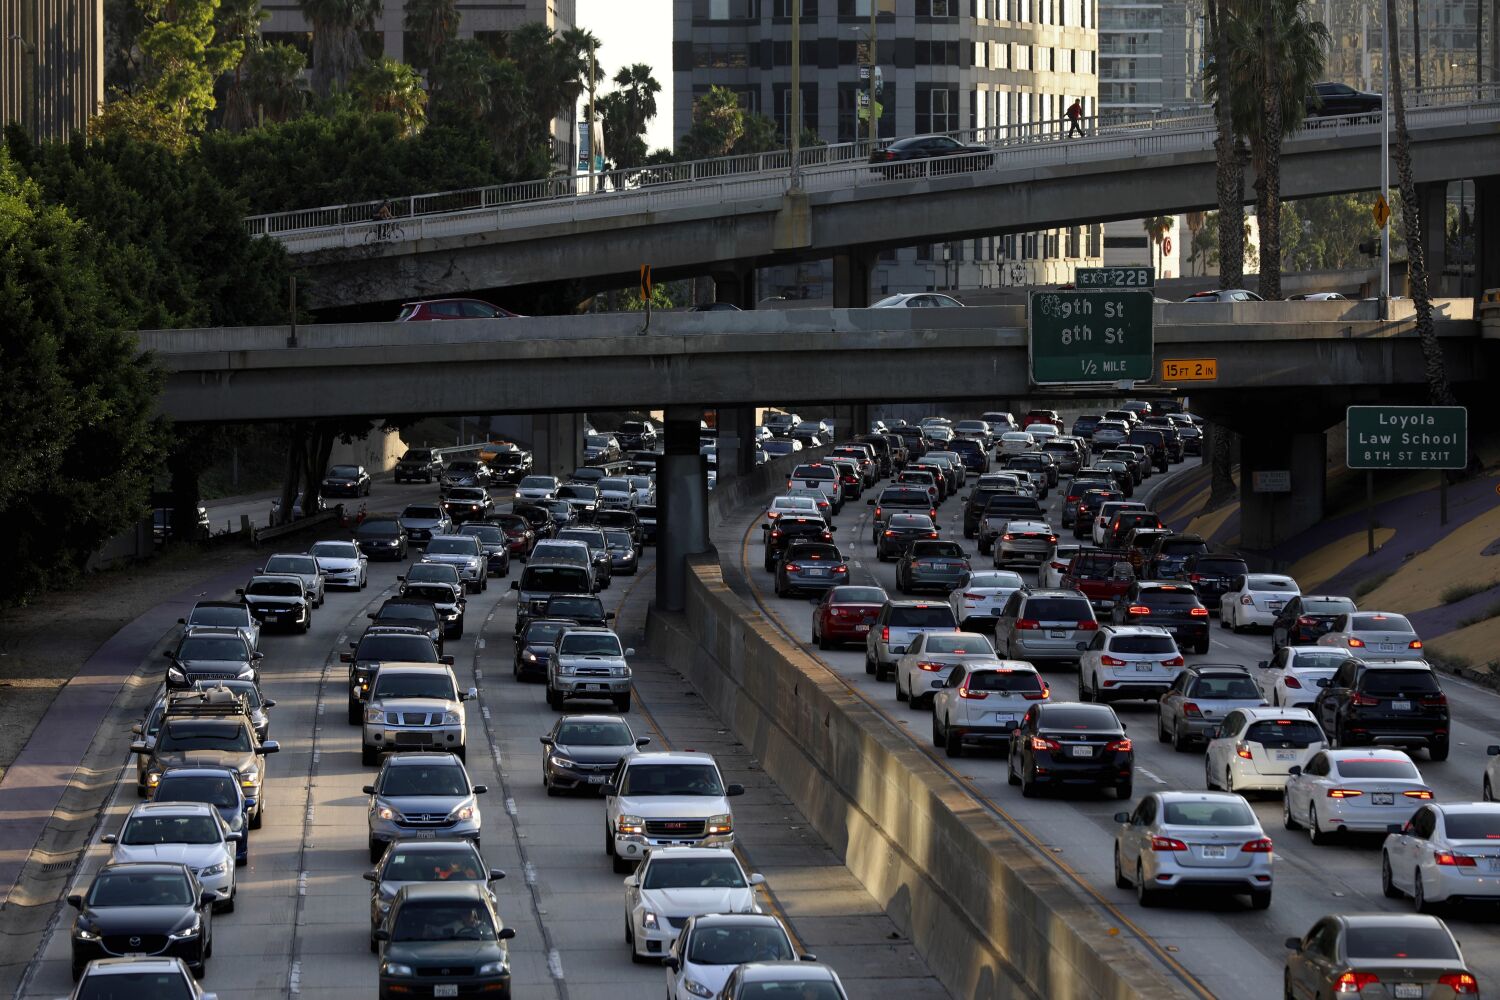 L.A. residents who drive less are exposed to more air pollution, study finds